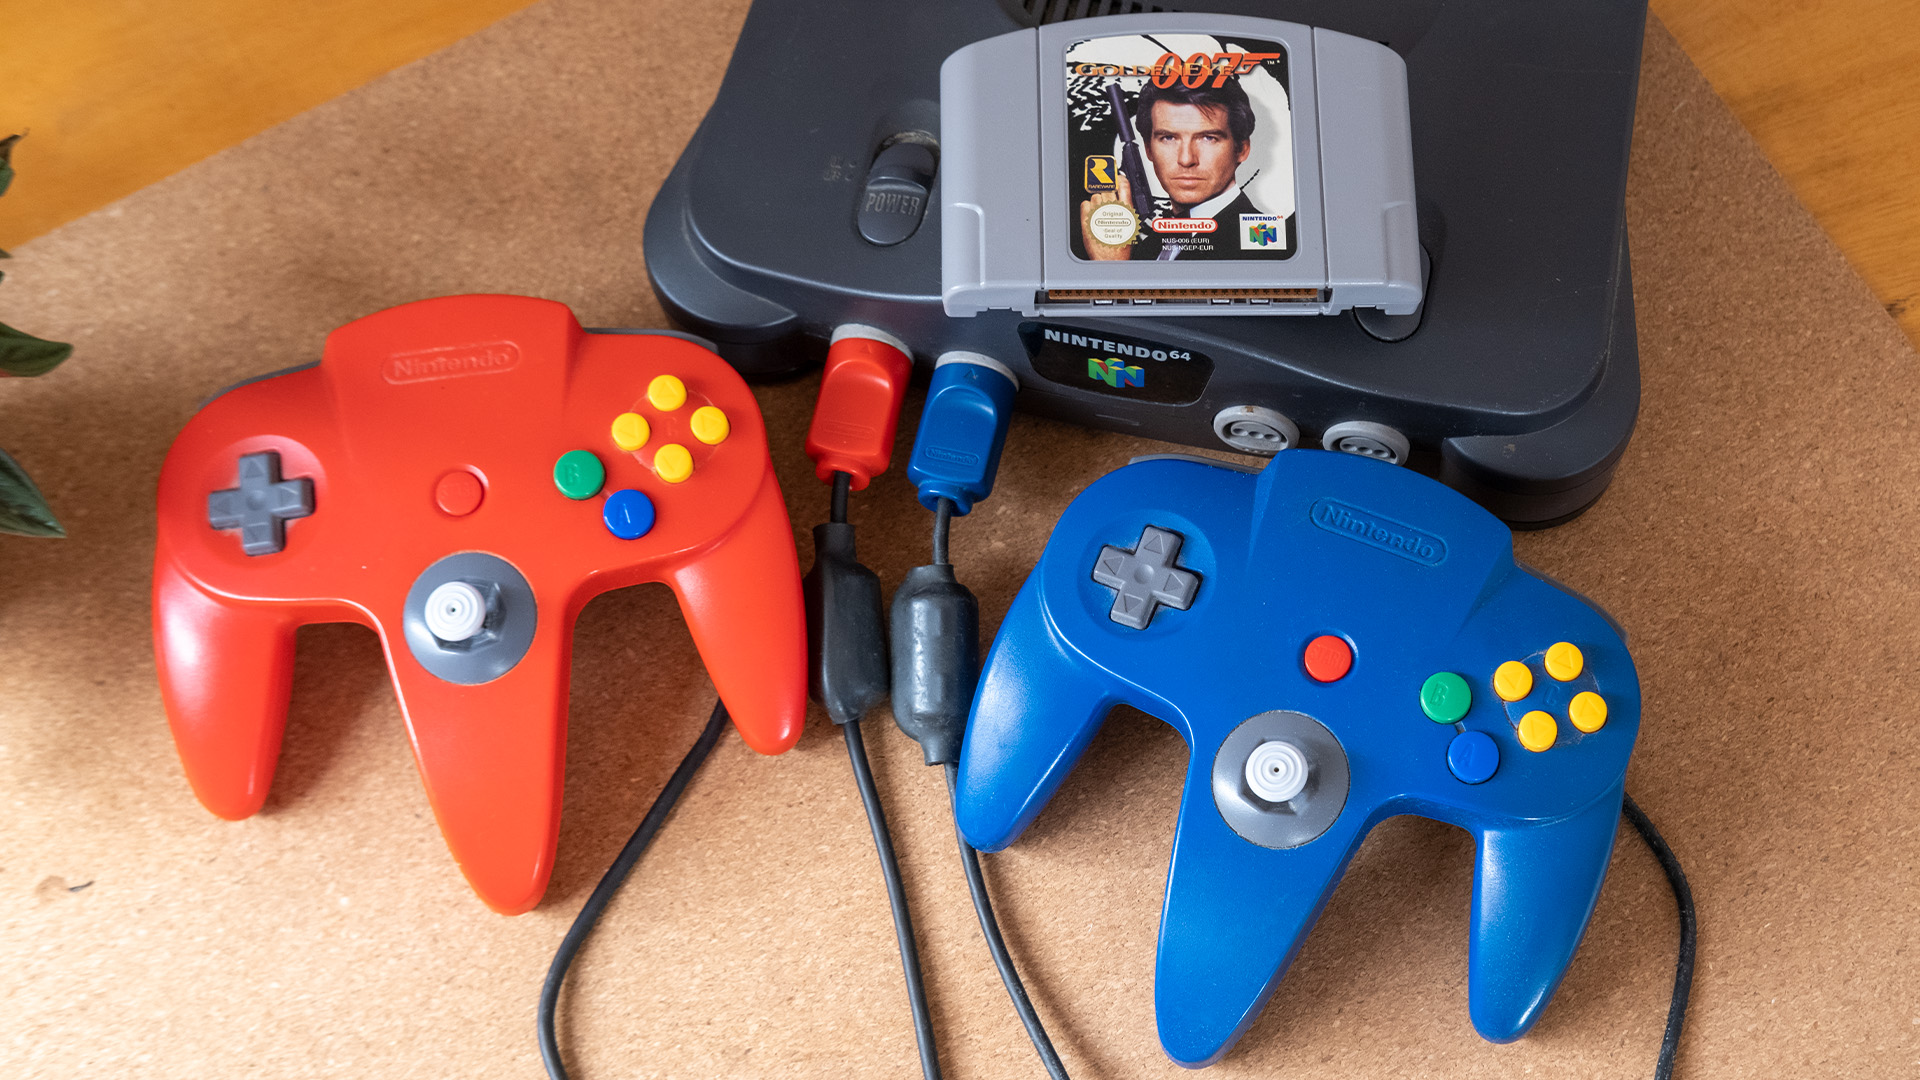 Connected N64 Controllers